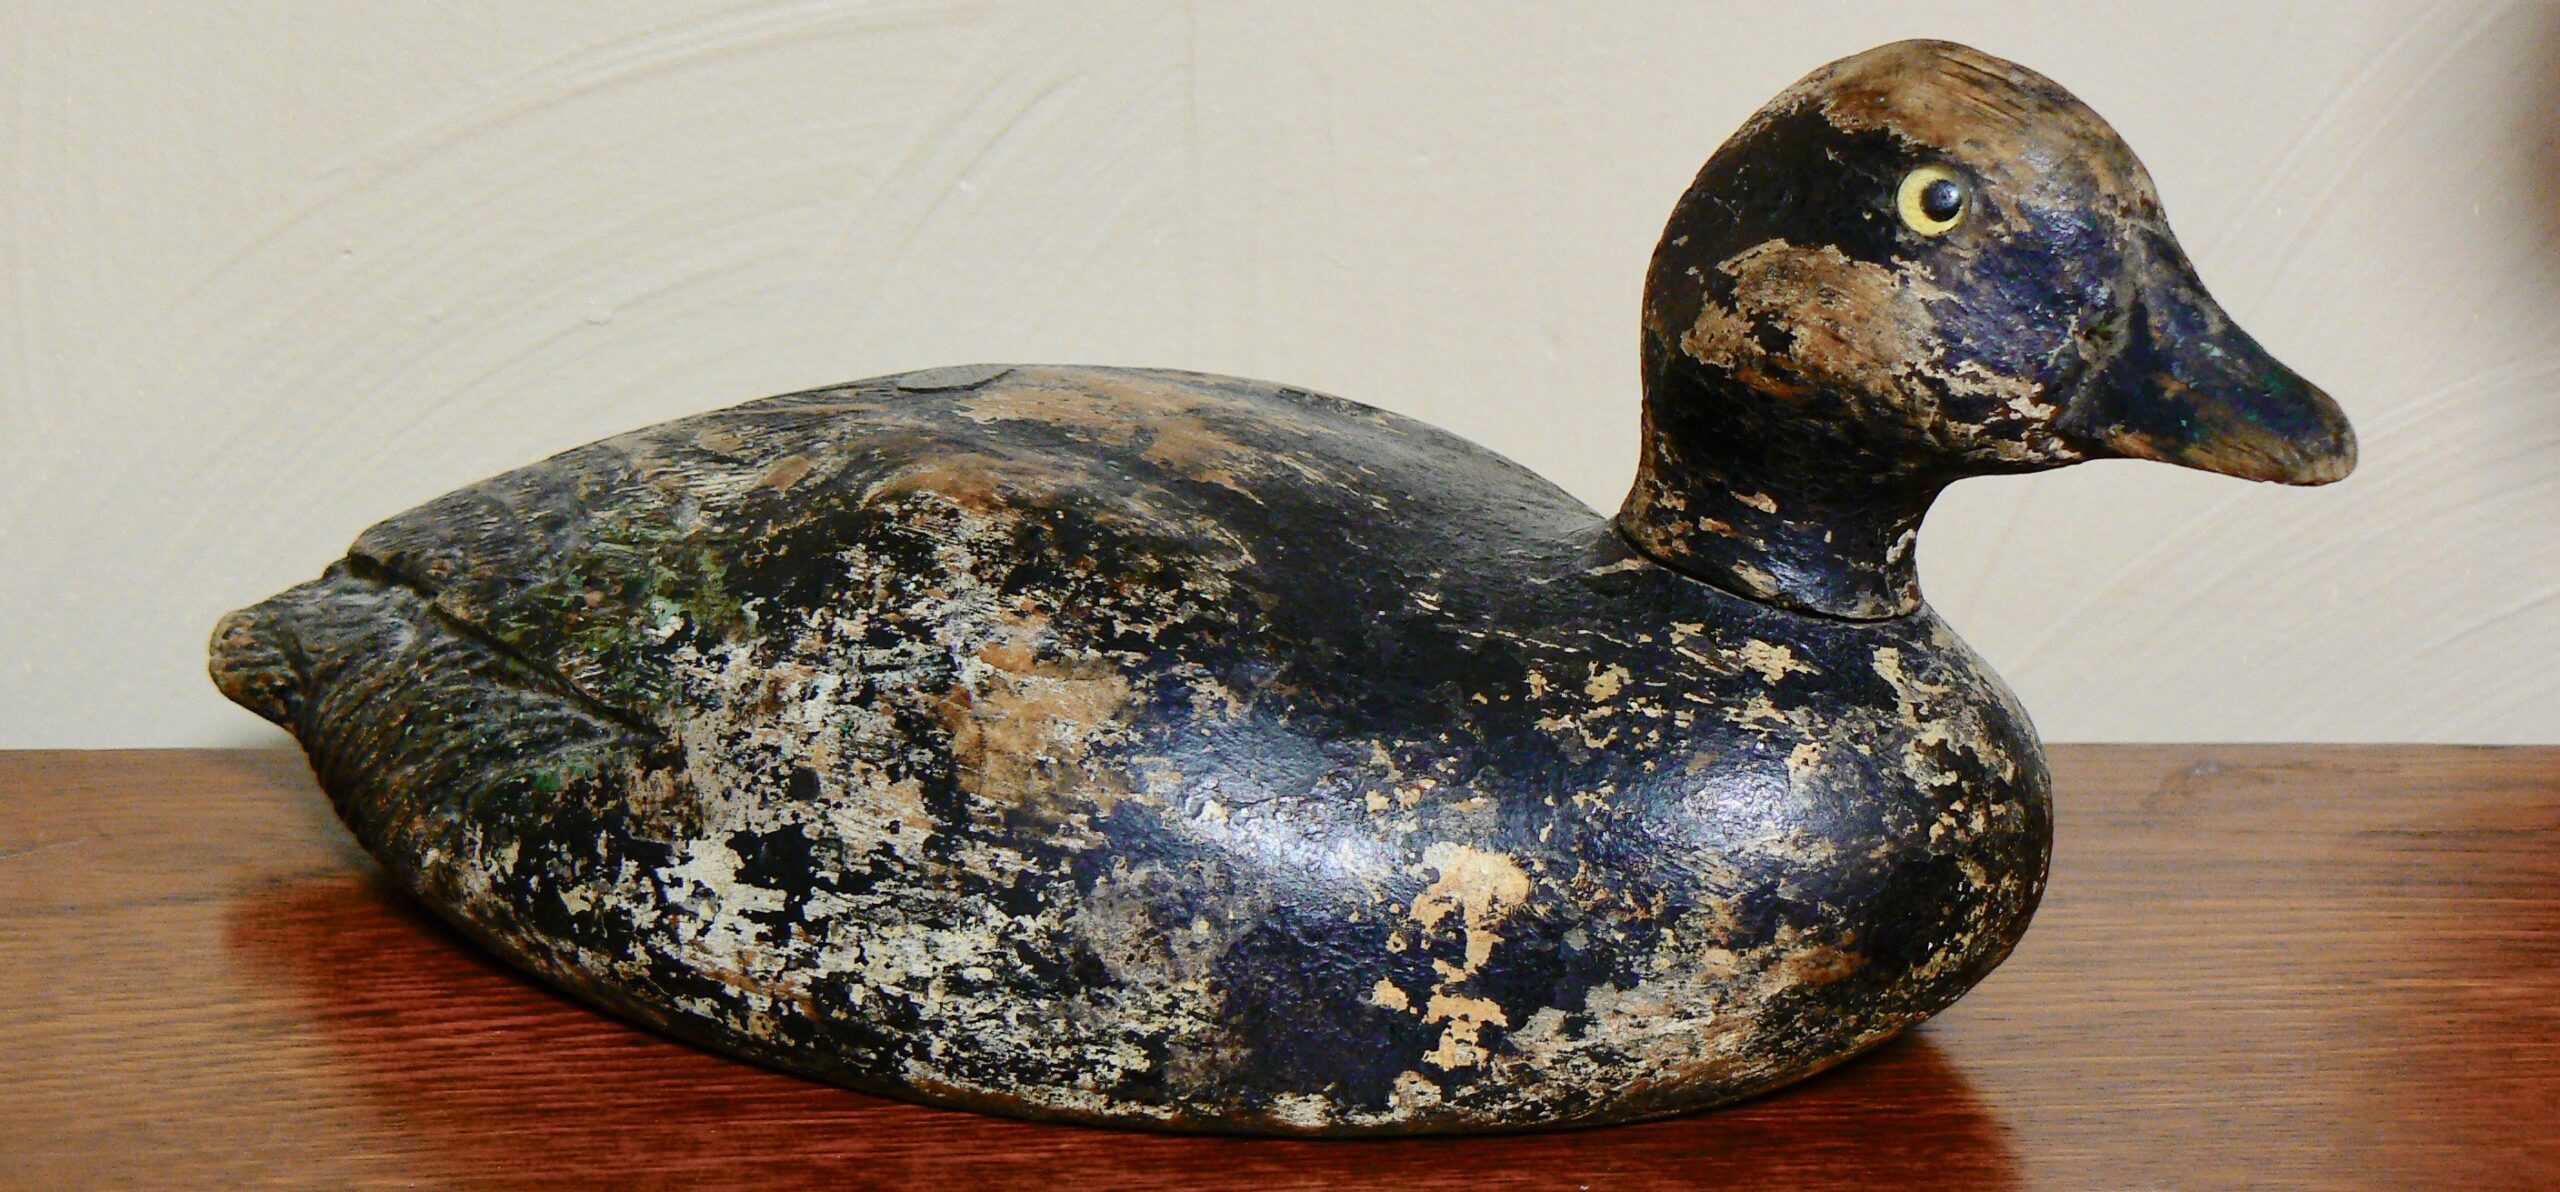 photo of antique coot duck decoy ready for antiques and estates appraisal services by appraiser Jerry L. Dobesh, ASA